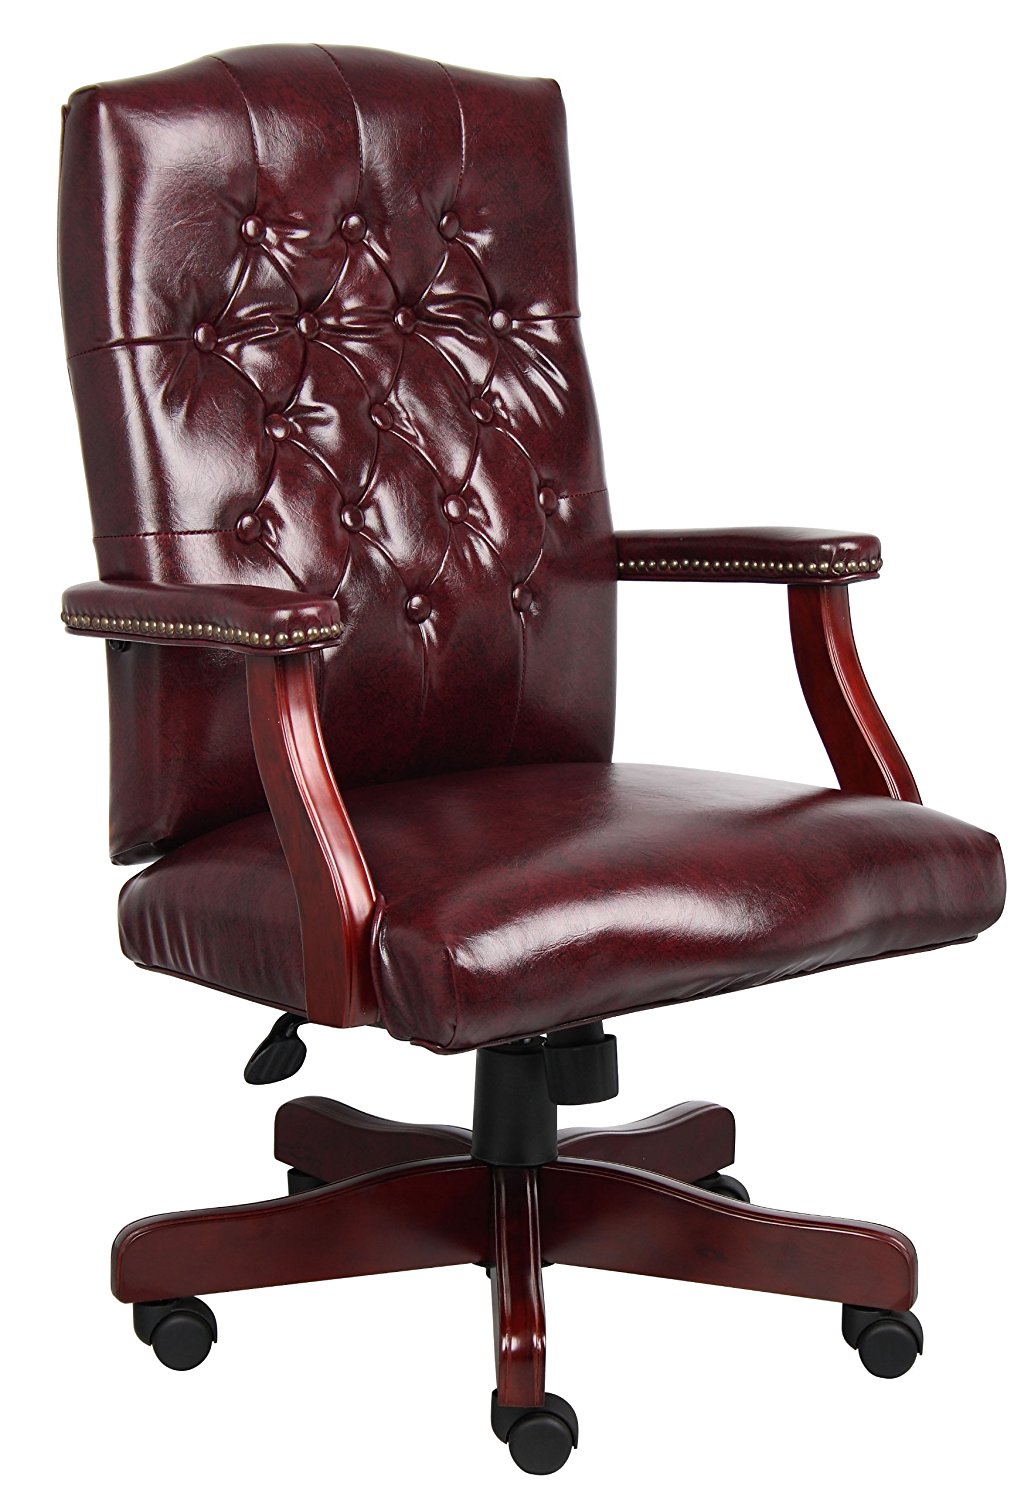 Picture of Boss High Back Button Tufted Executive Mahogany Wood Finish Chair - B905 - Oxblood Vinyl